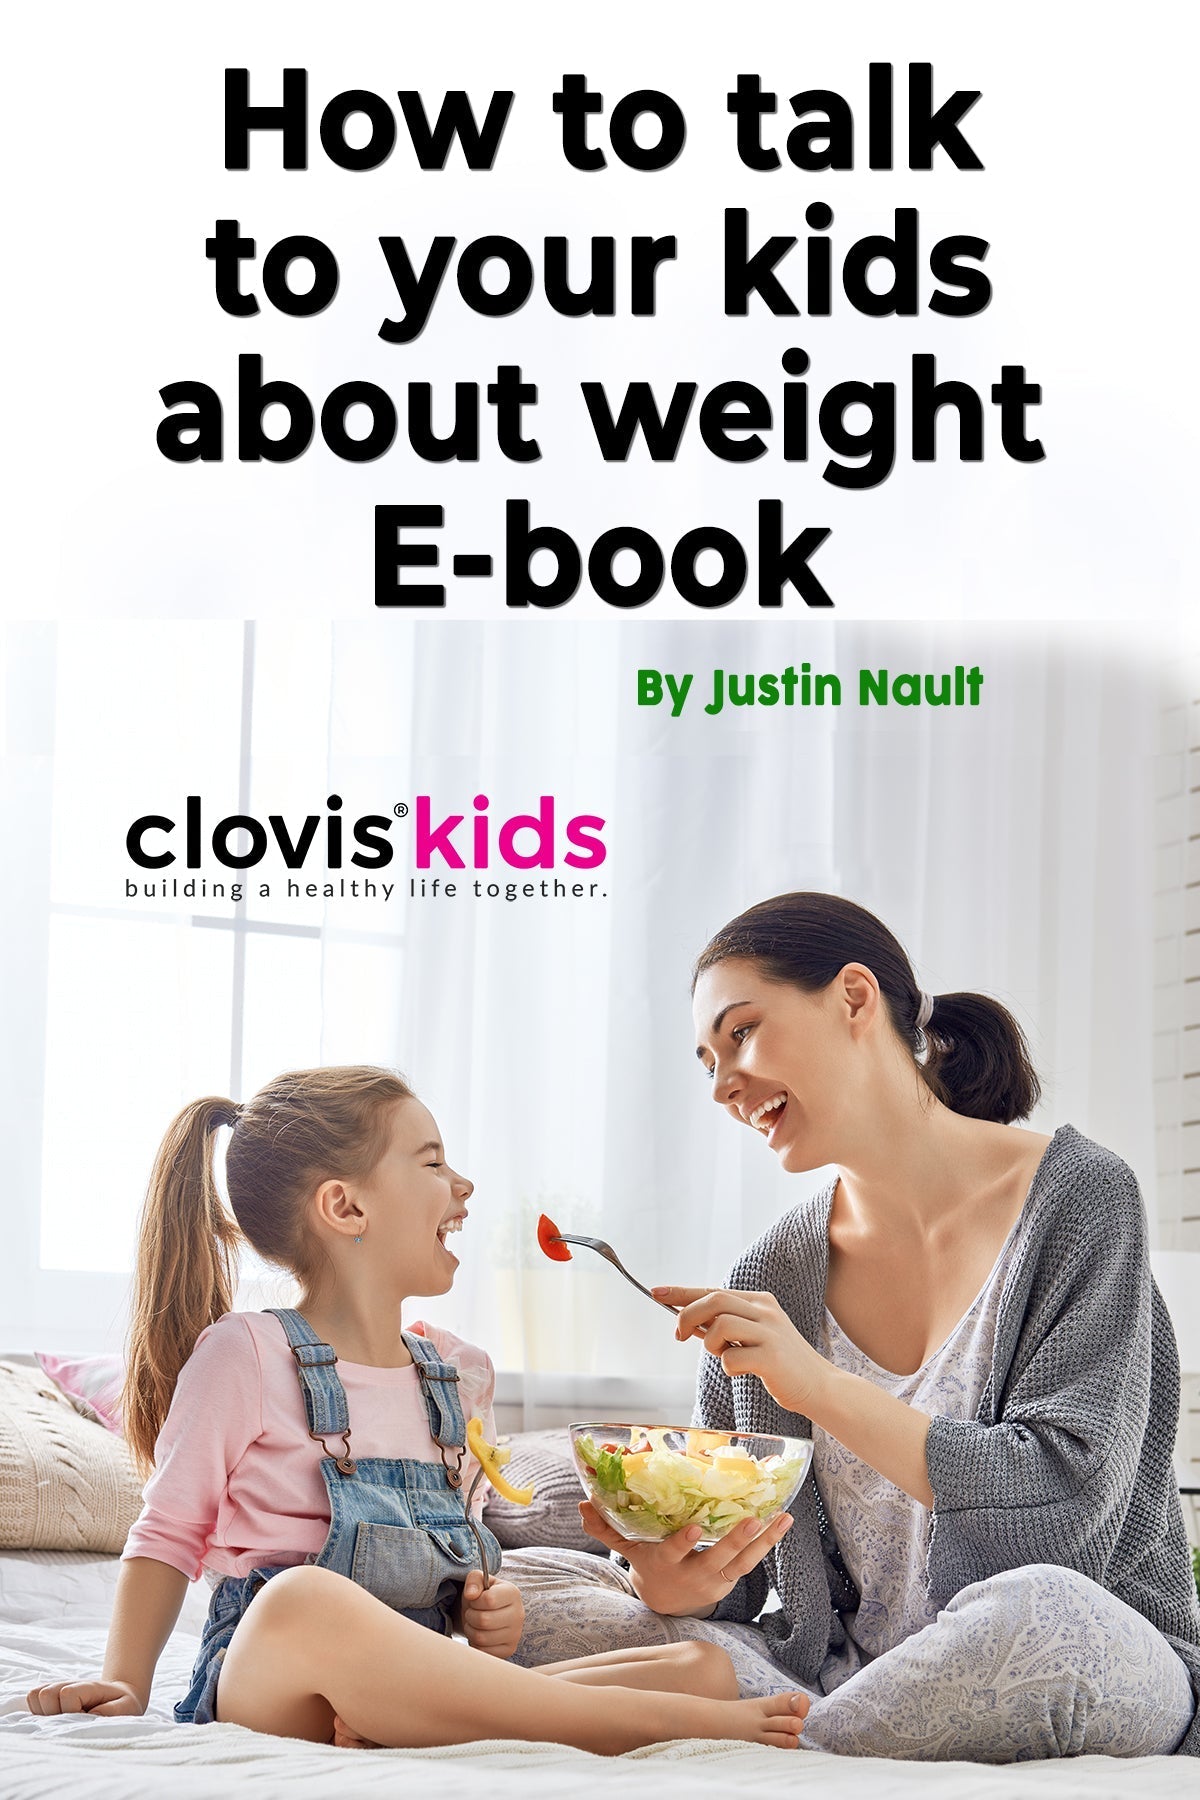 How To Talk To Your Kids About Weight by Justin Nault - E-Book - Clovis